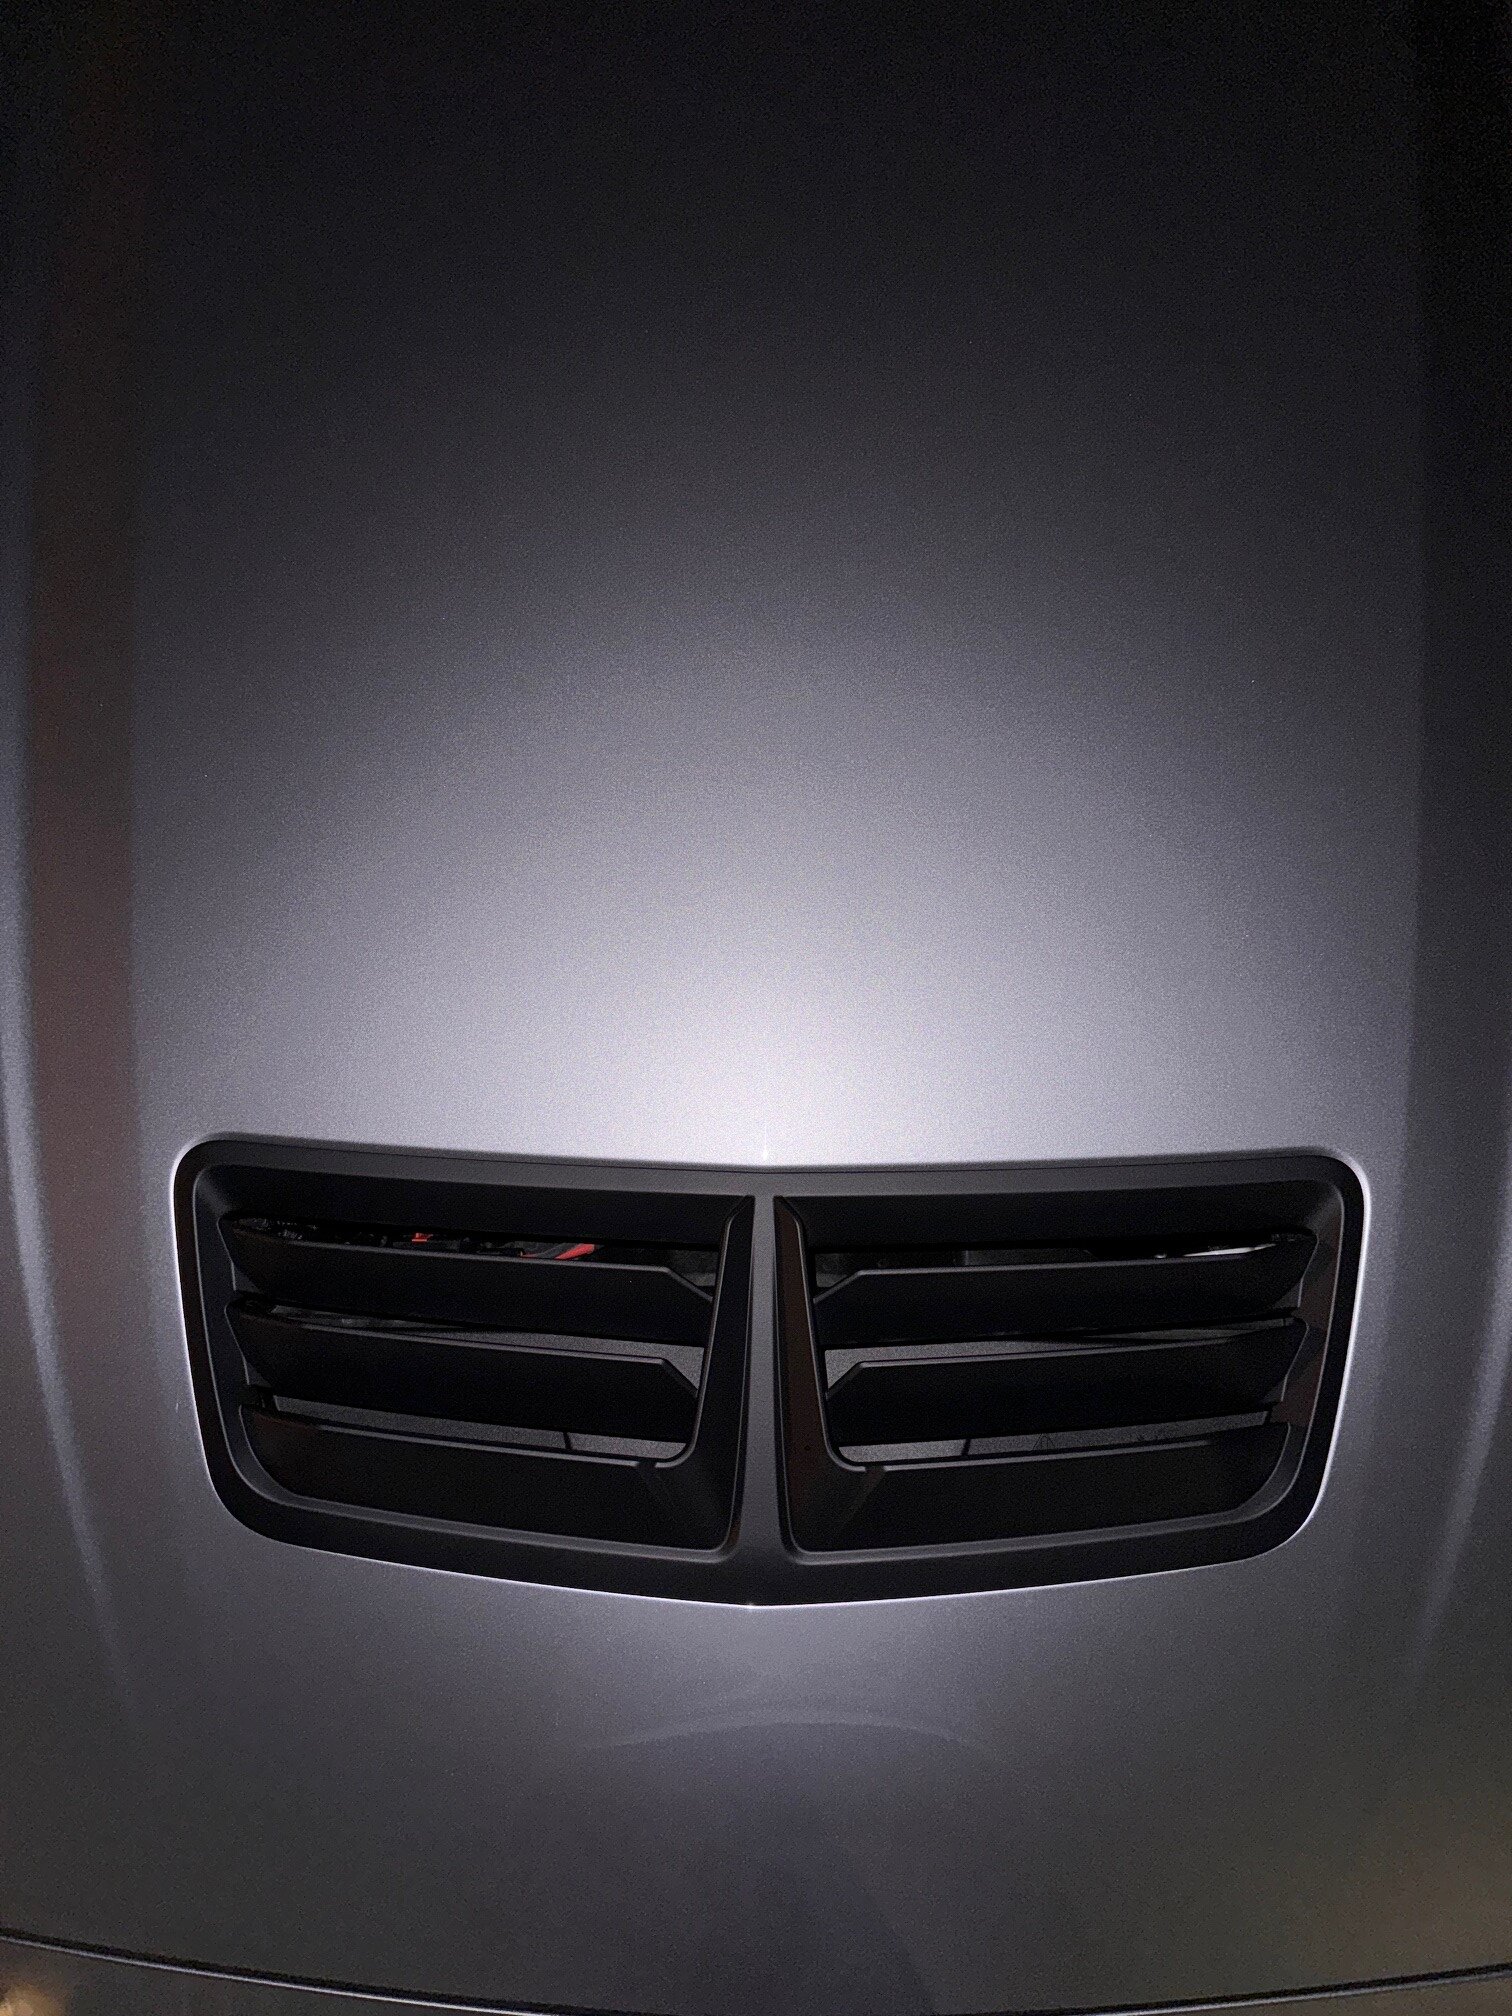 S650 Mustang RTR hood vent installed! RTR hood vent4